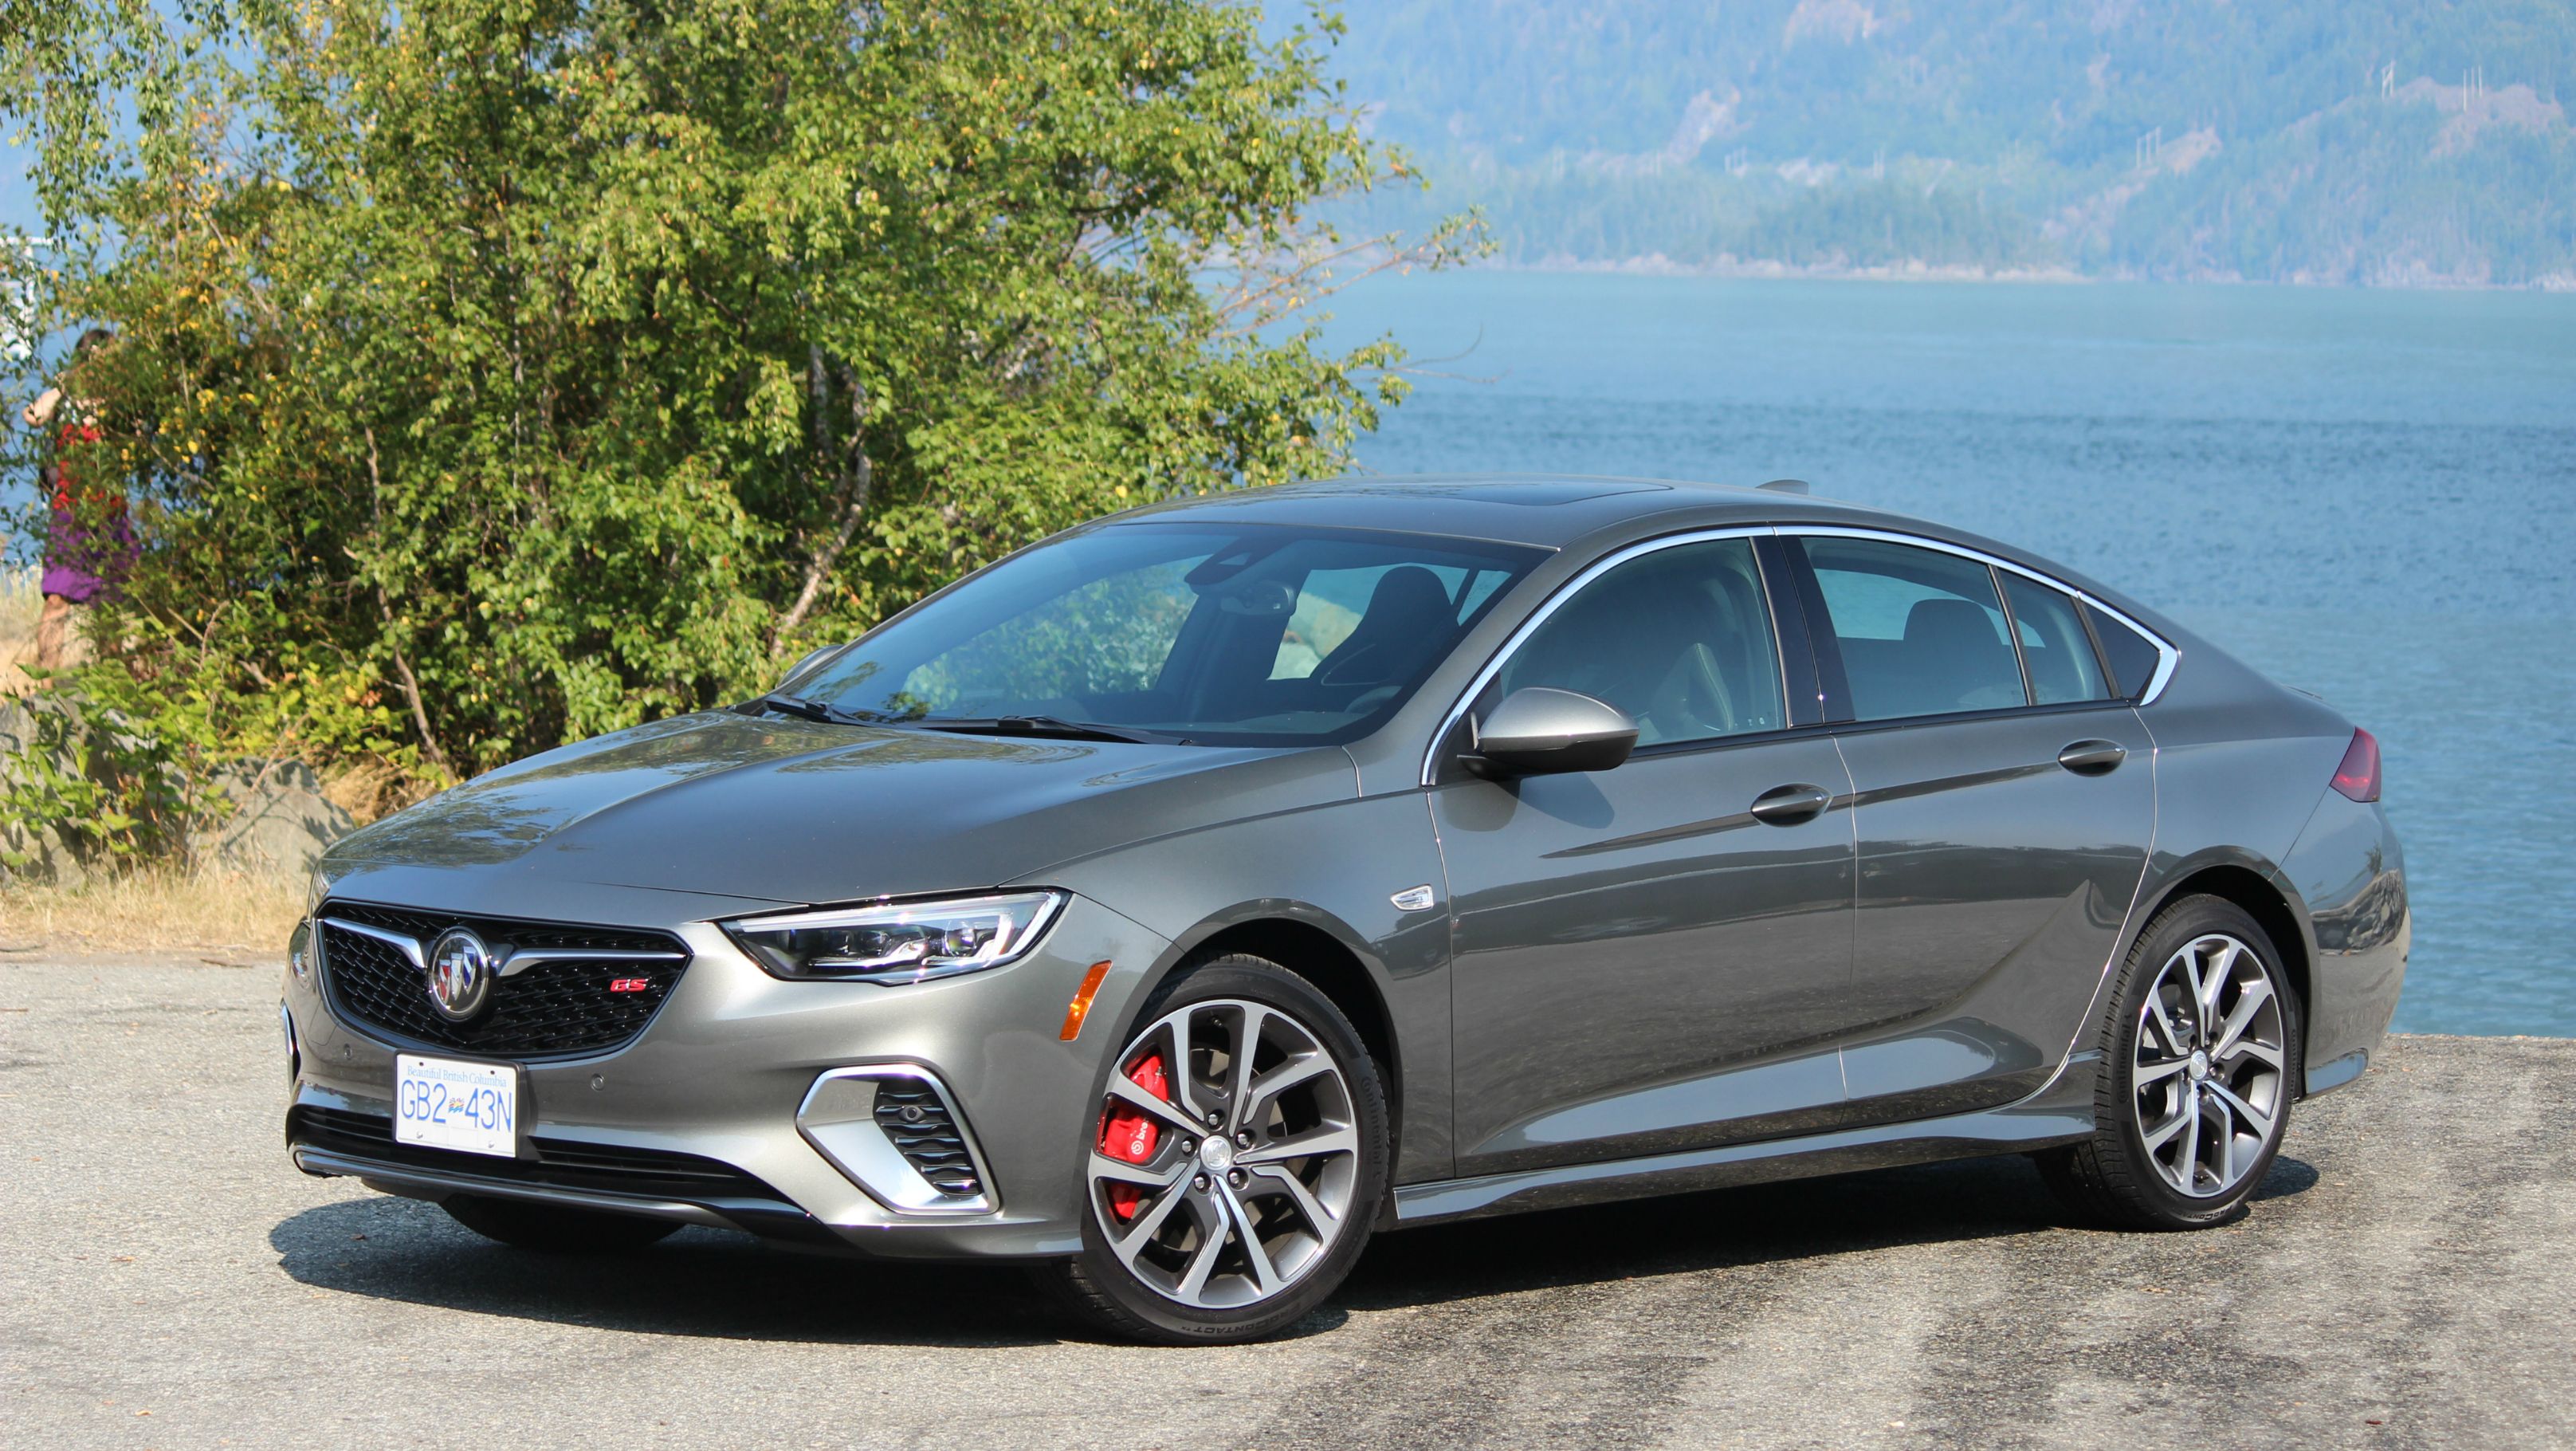 Silver 2018 Buick Regal GS parked in front of lake